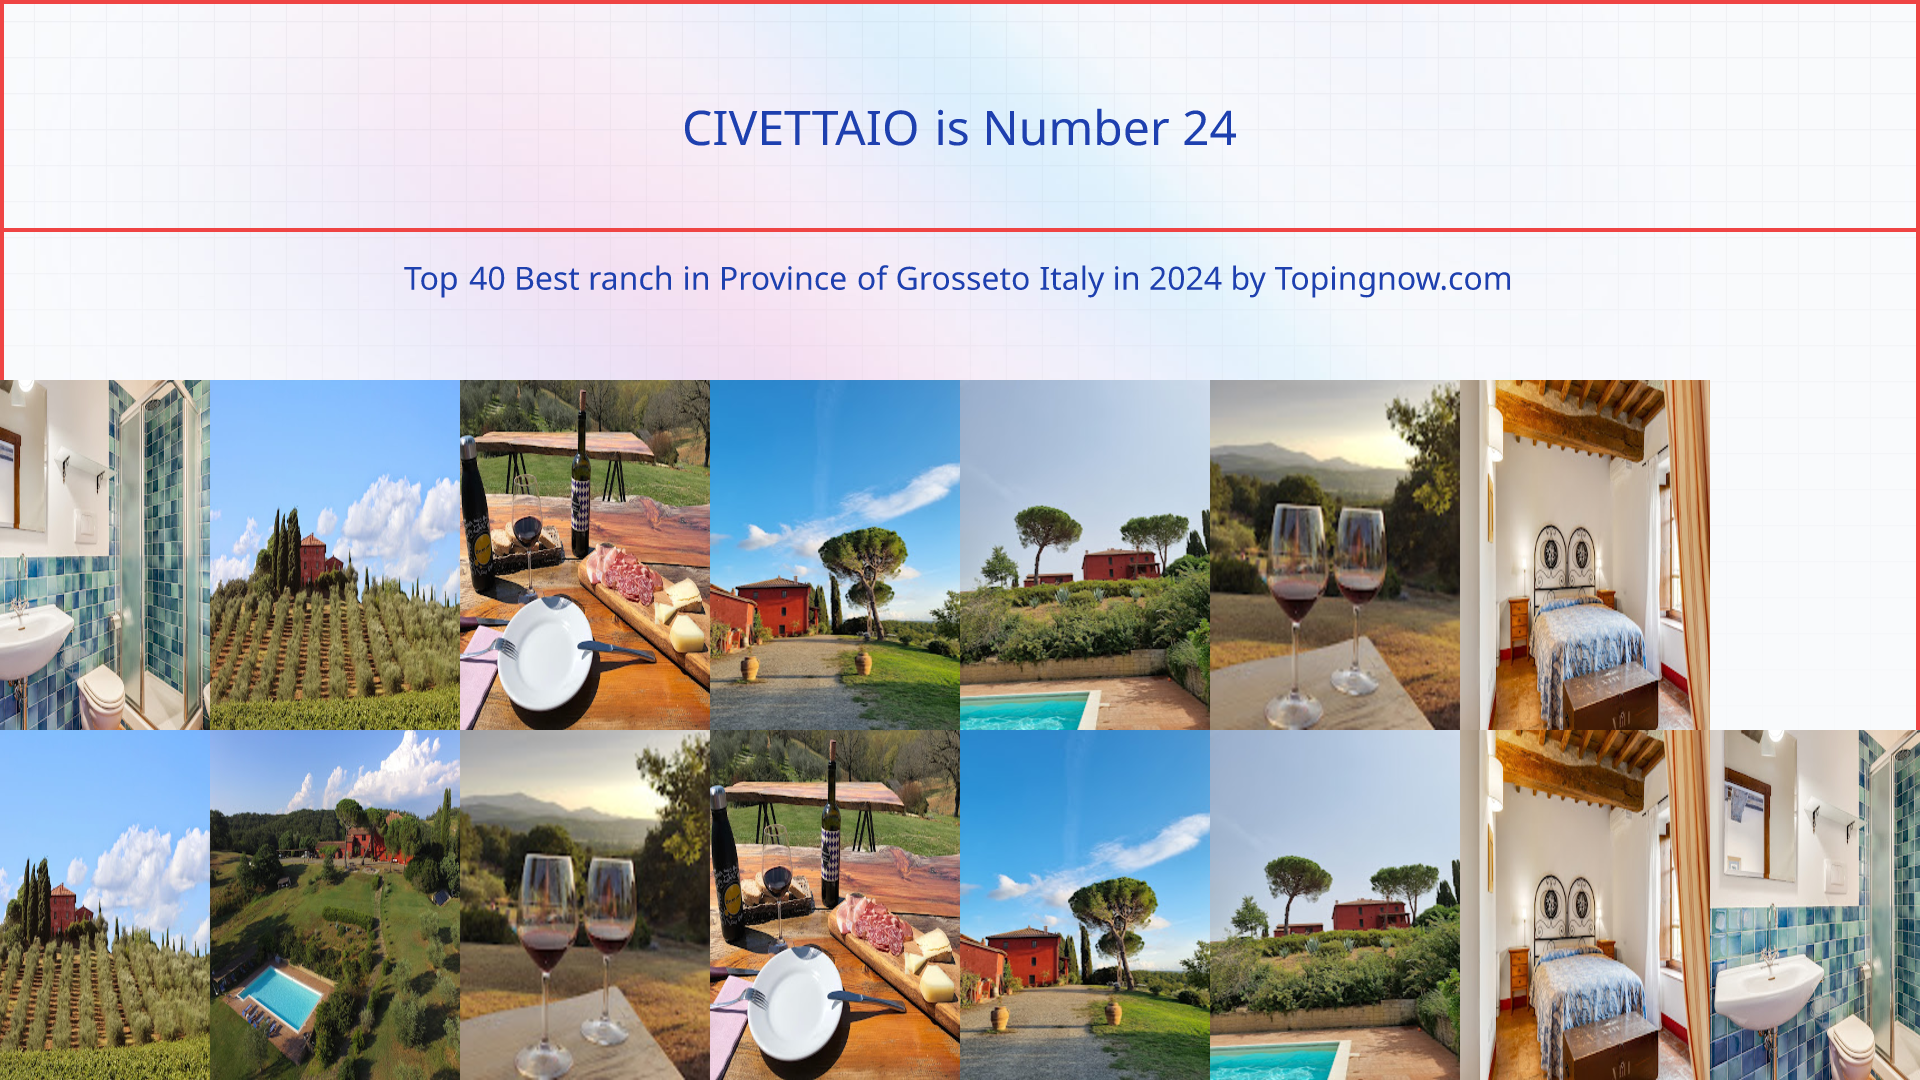 CIVETTAIO: Top 40 Best ranch in Province of Grosseto Italy in 2024